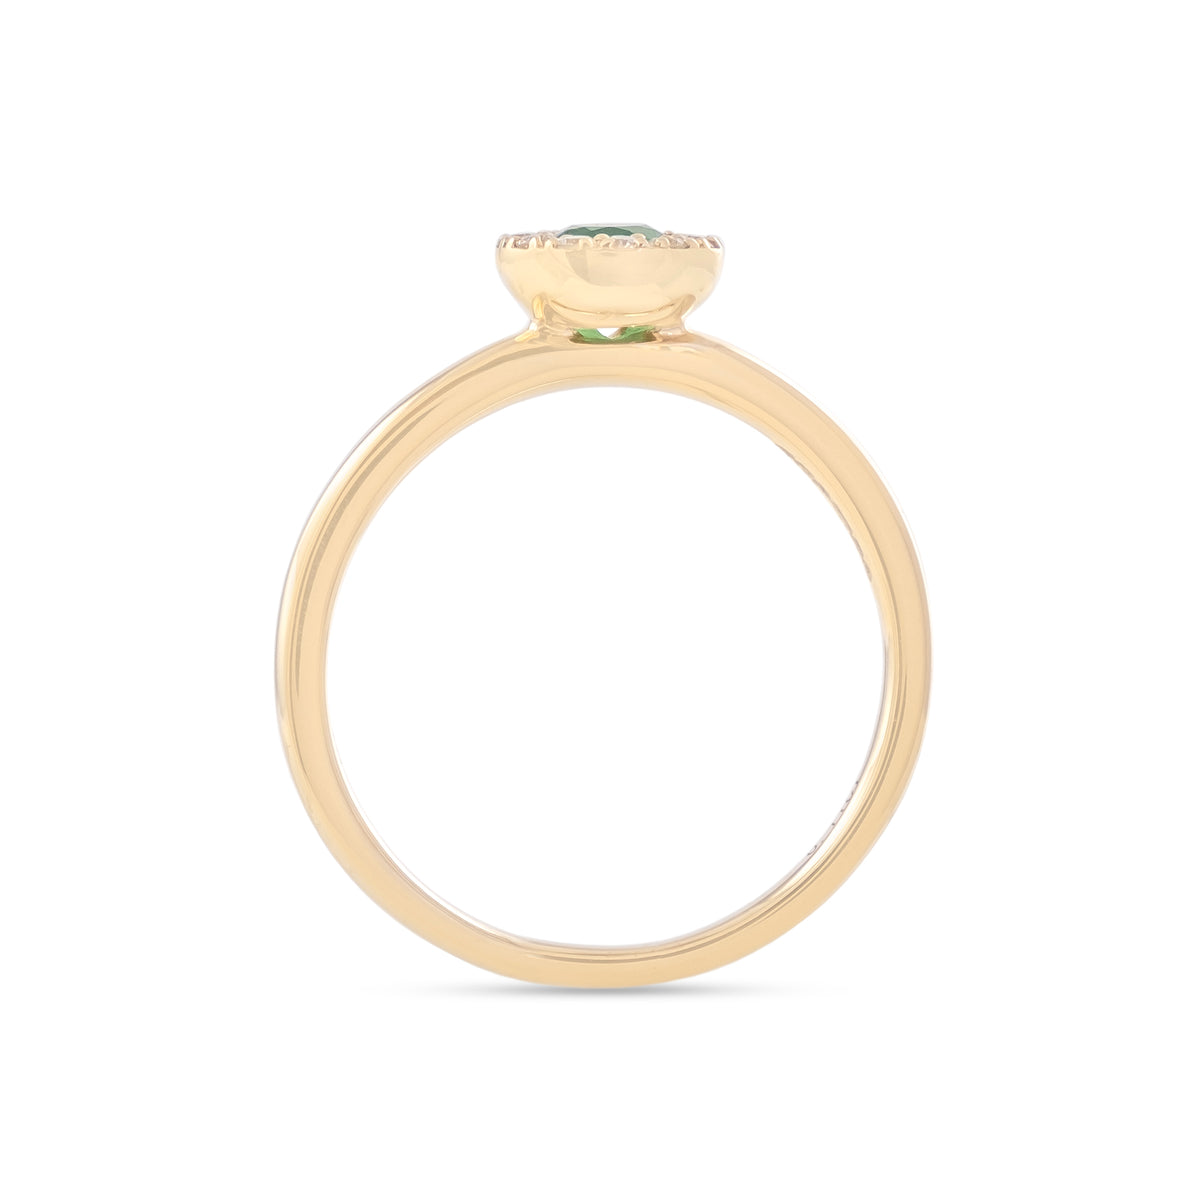 9ct Yellow Gold Emerald and Diamond Halo Ring